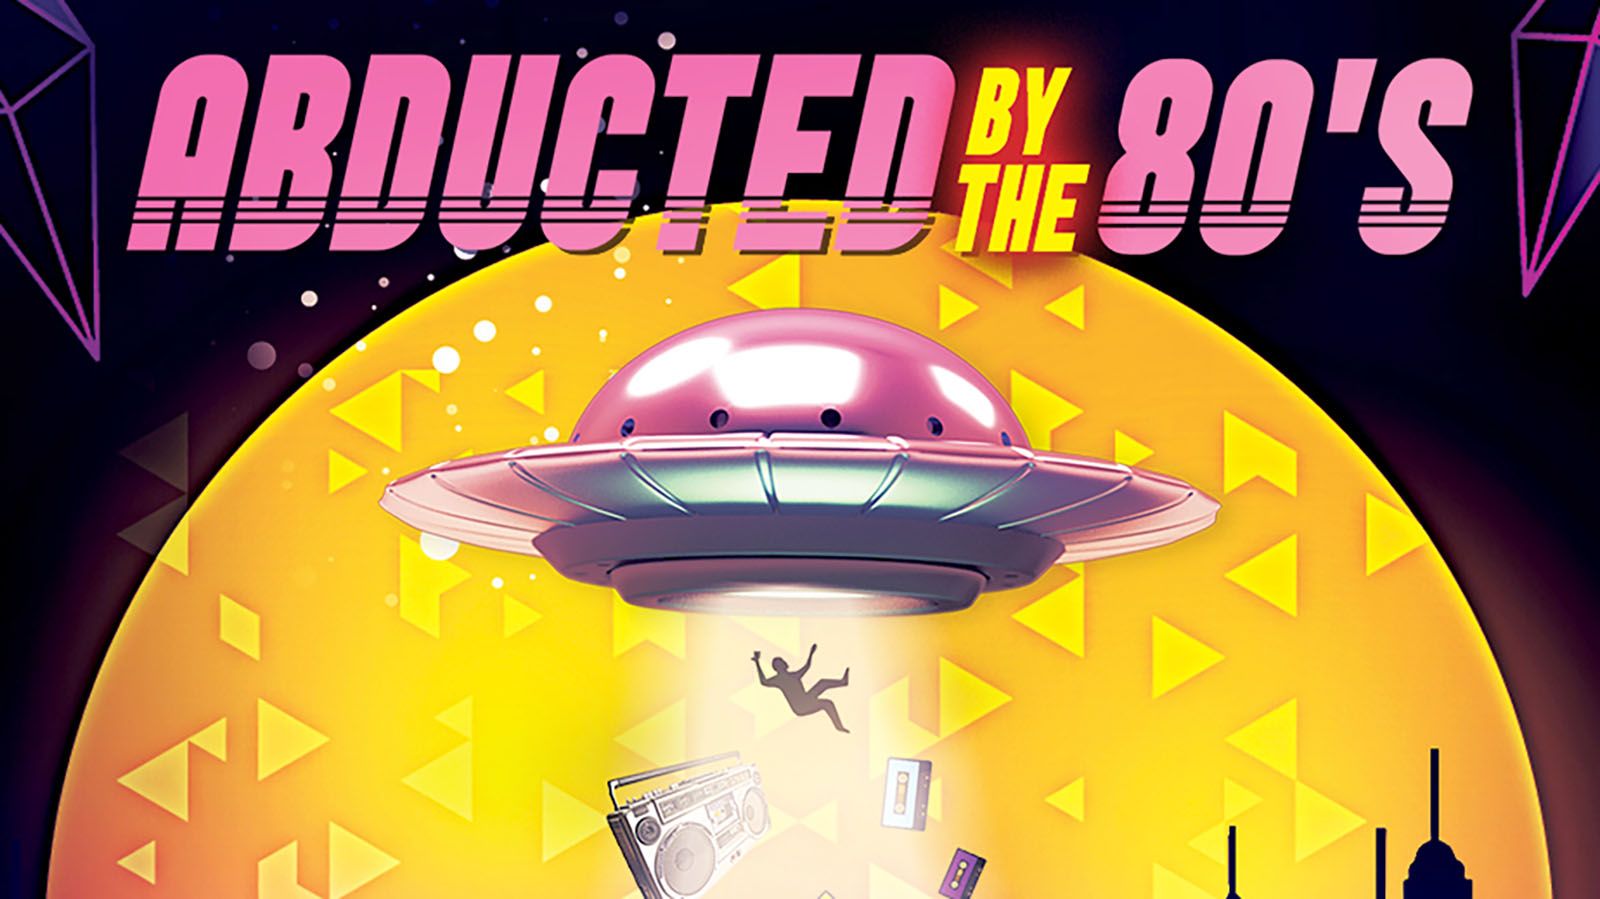 The Abducted by the 80's tour stops at The Clyde Theatre on June 9.